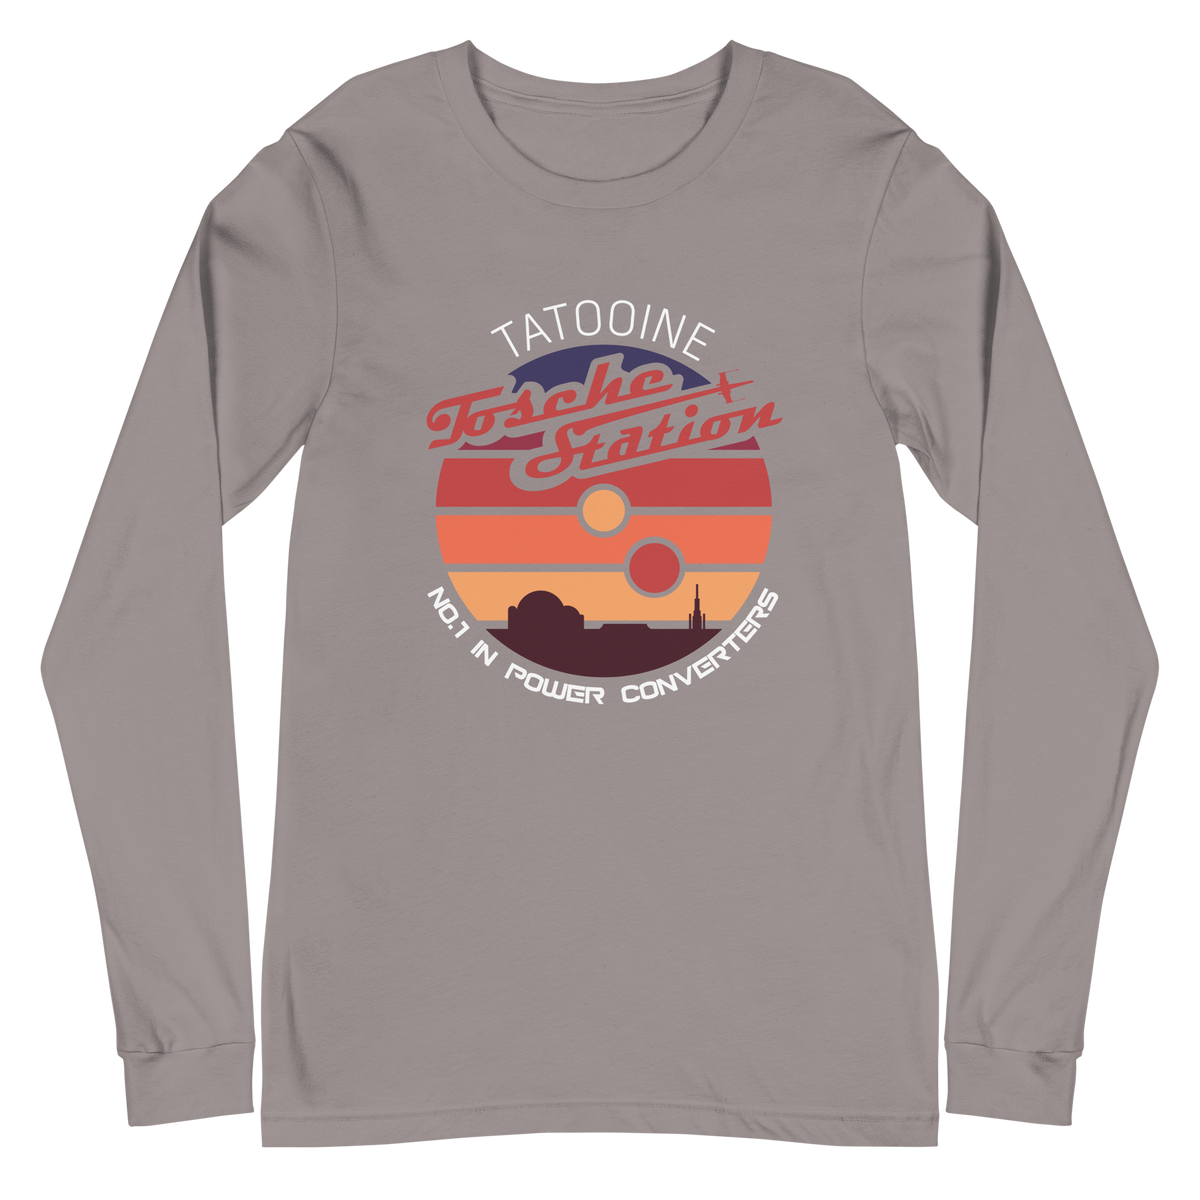 Tatooine Tosche Station Long Sleeve